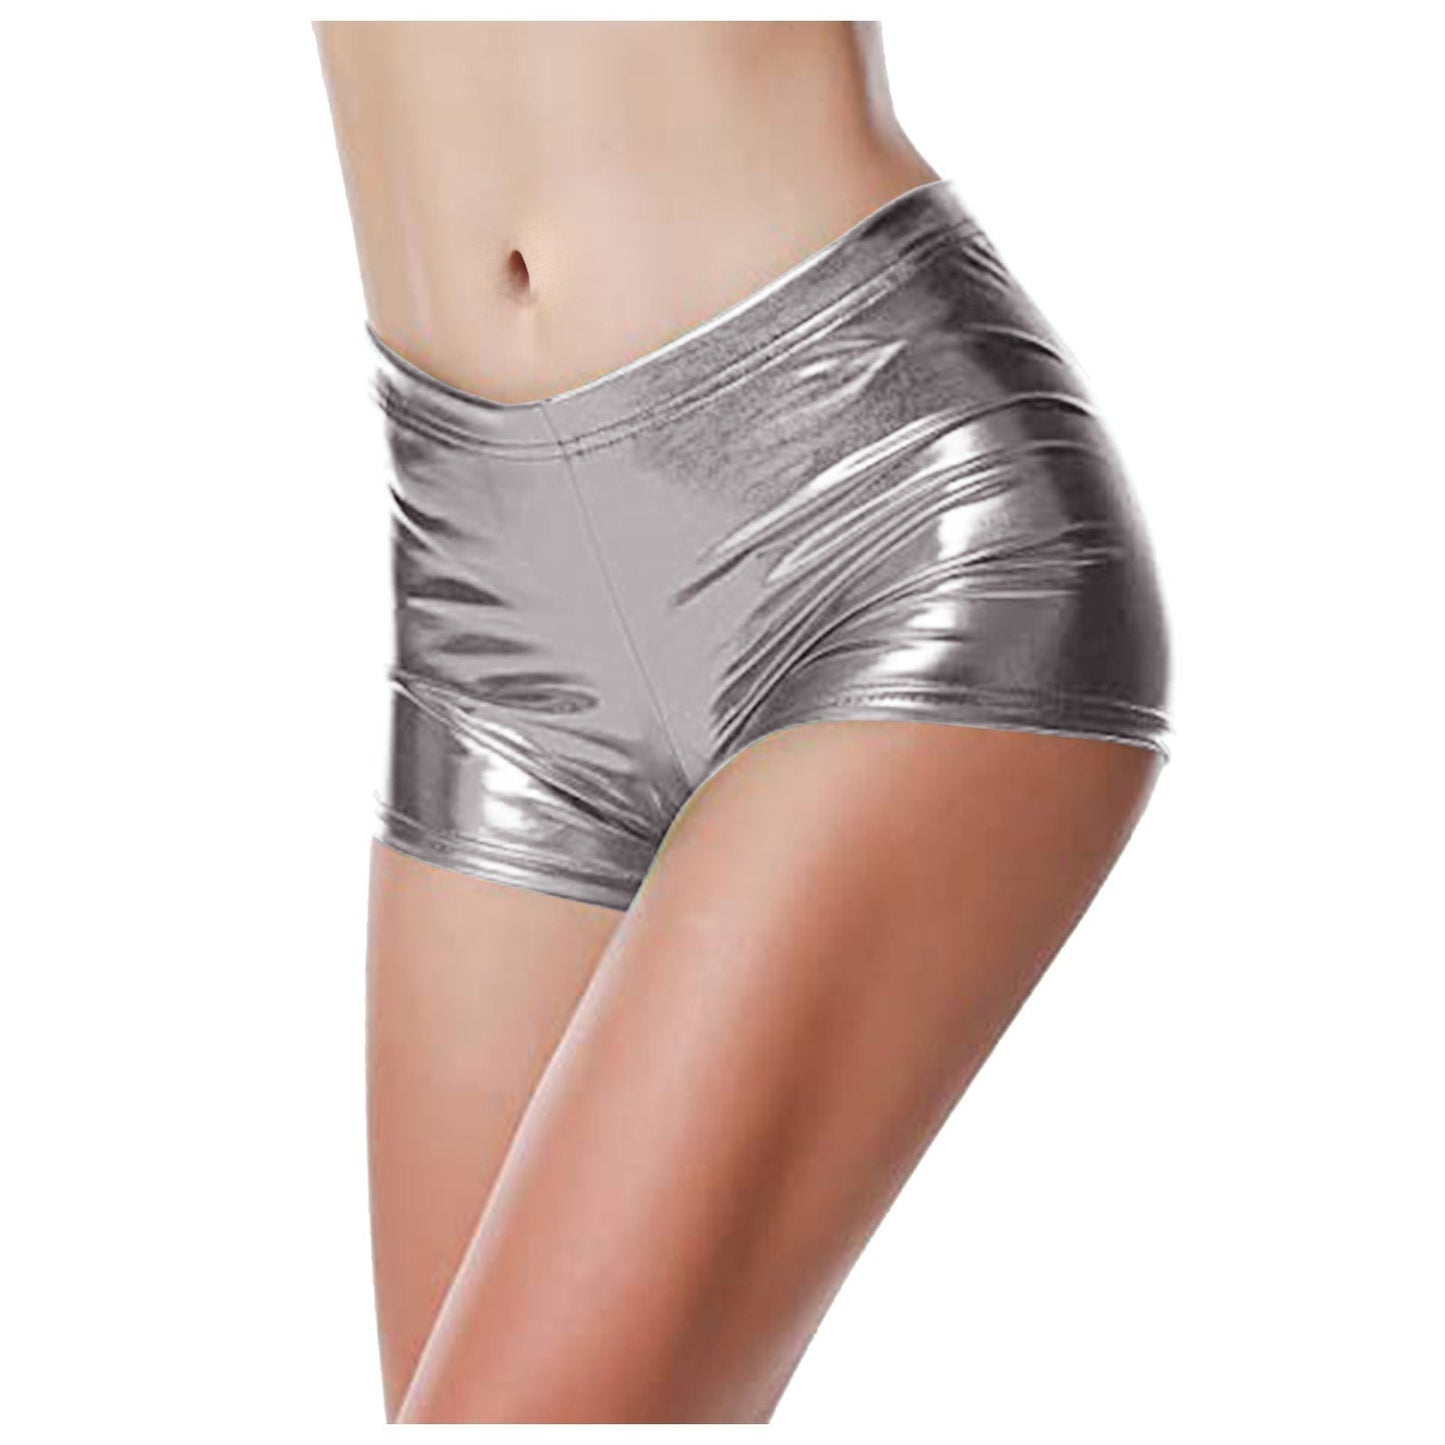 Metallic Coated Fabric Shorts Women Activity Stage Wear Elastic Waist Color Bronzing Patent Leather Sexy Pants